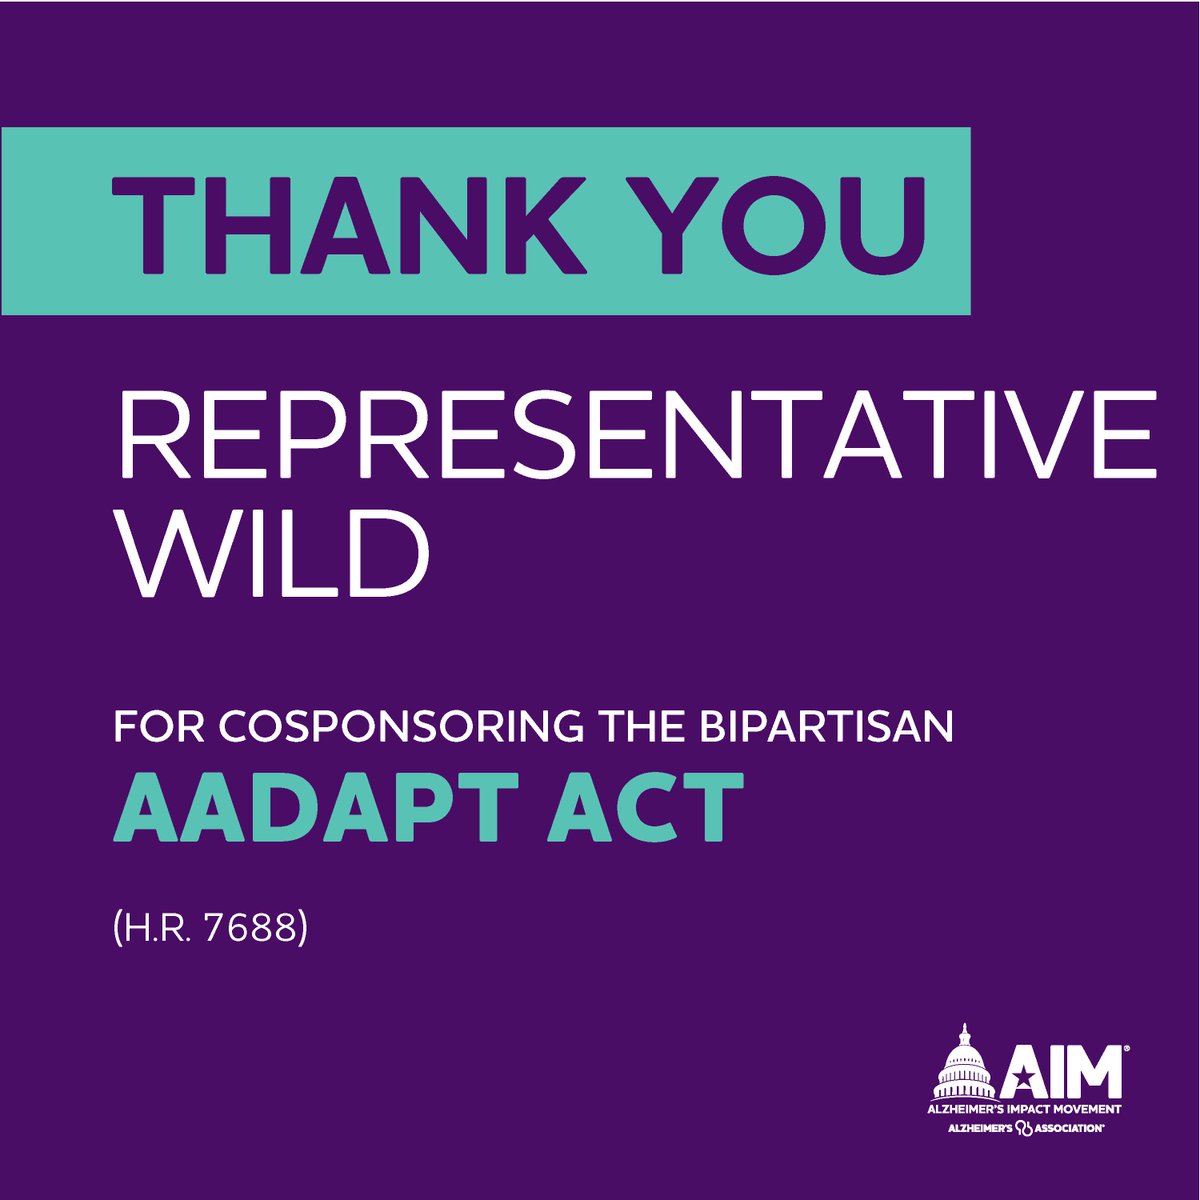 Thank you, @RepSusanWild, for improving dementia training and education for primary care providers by cosponsoring the #AADAPTAct.